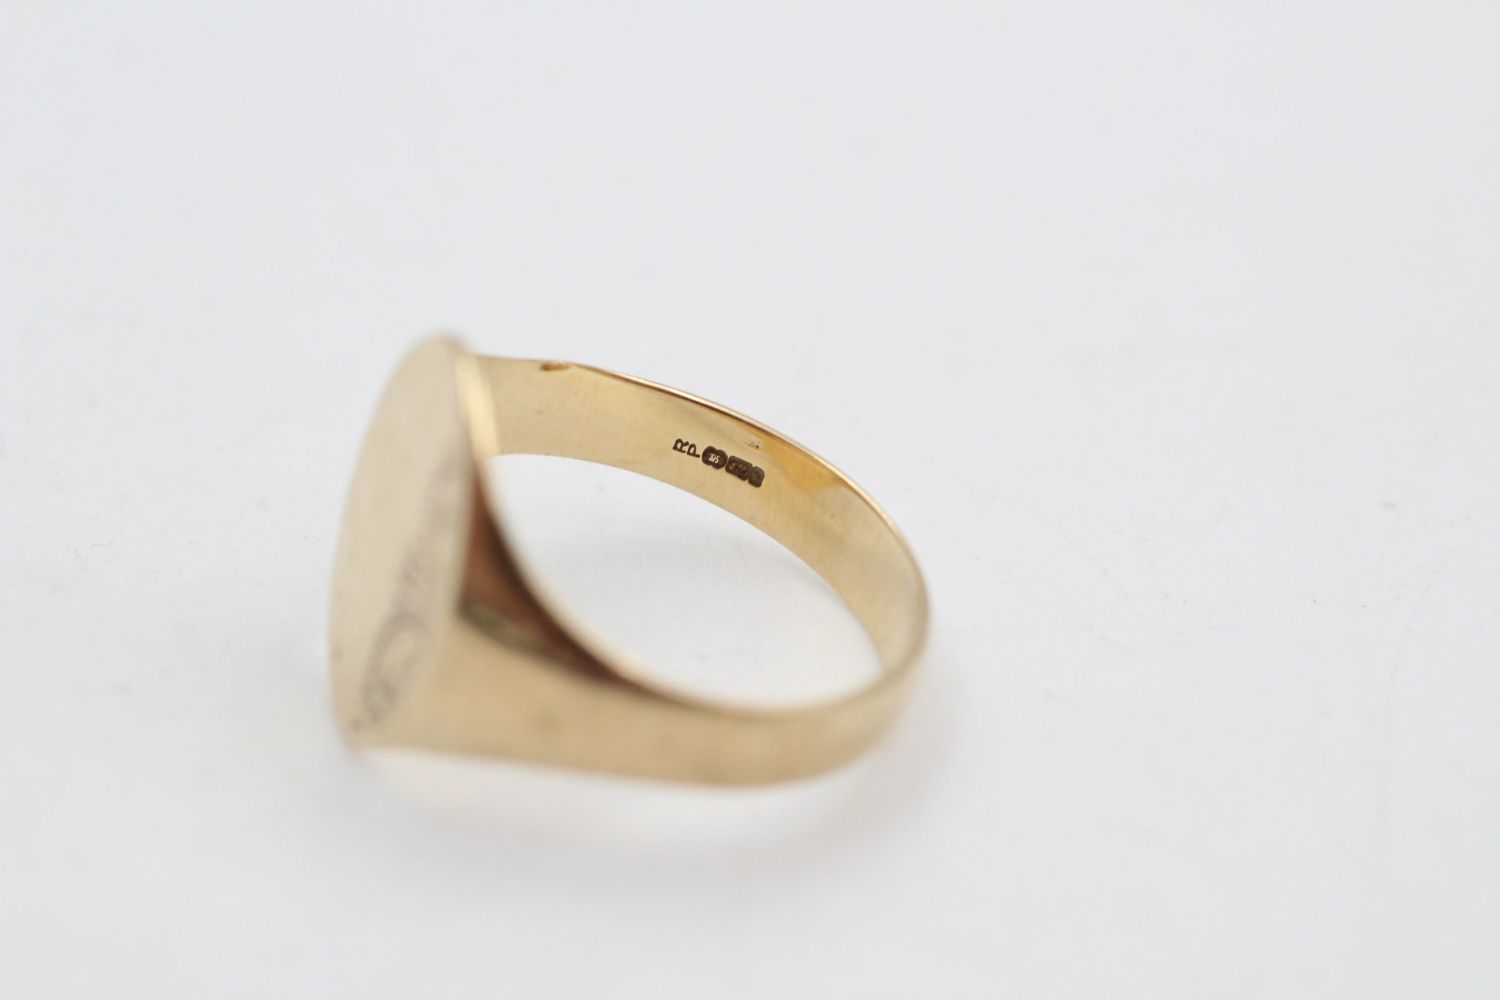 9ct Gold engraved oval signet ring 2.8 grams gross - Image 4 of 5